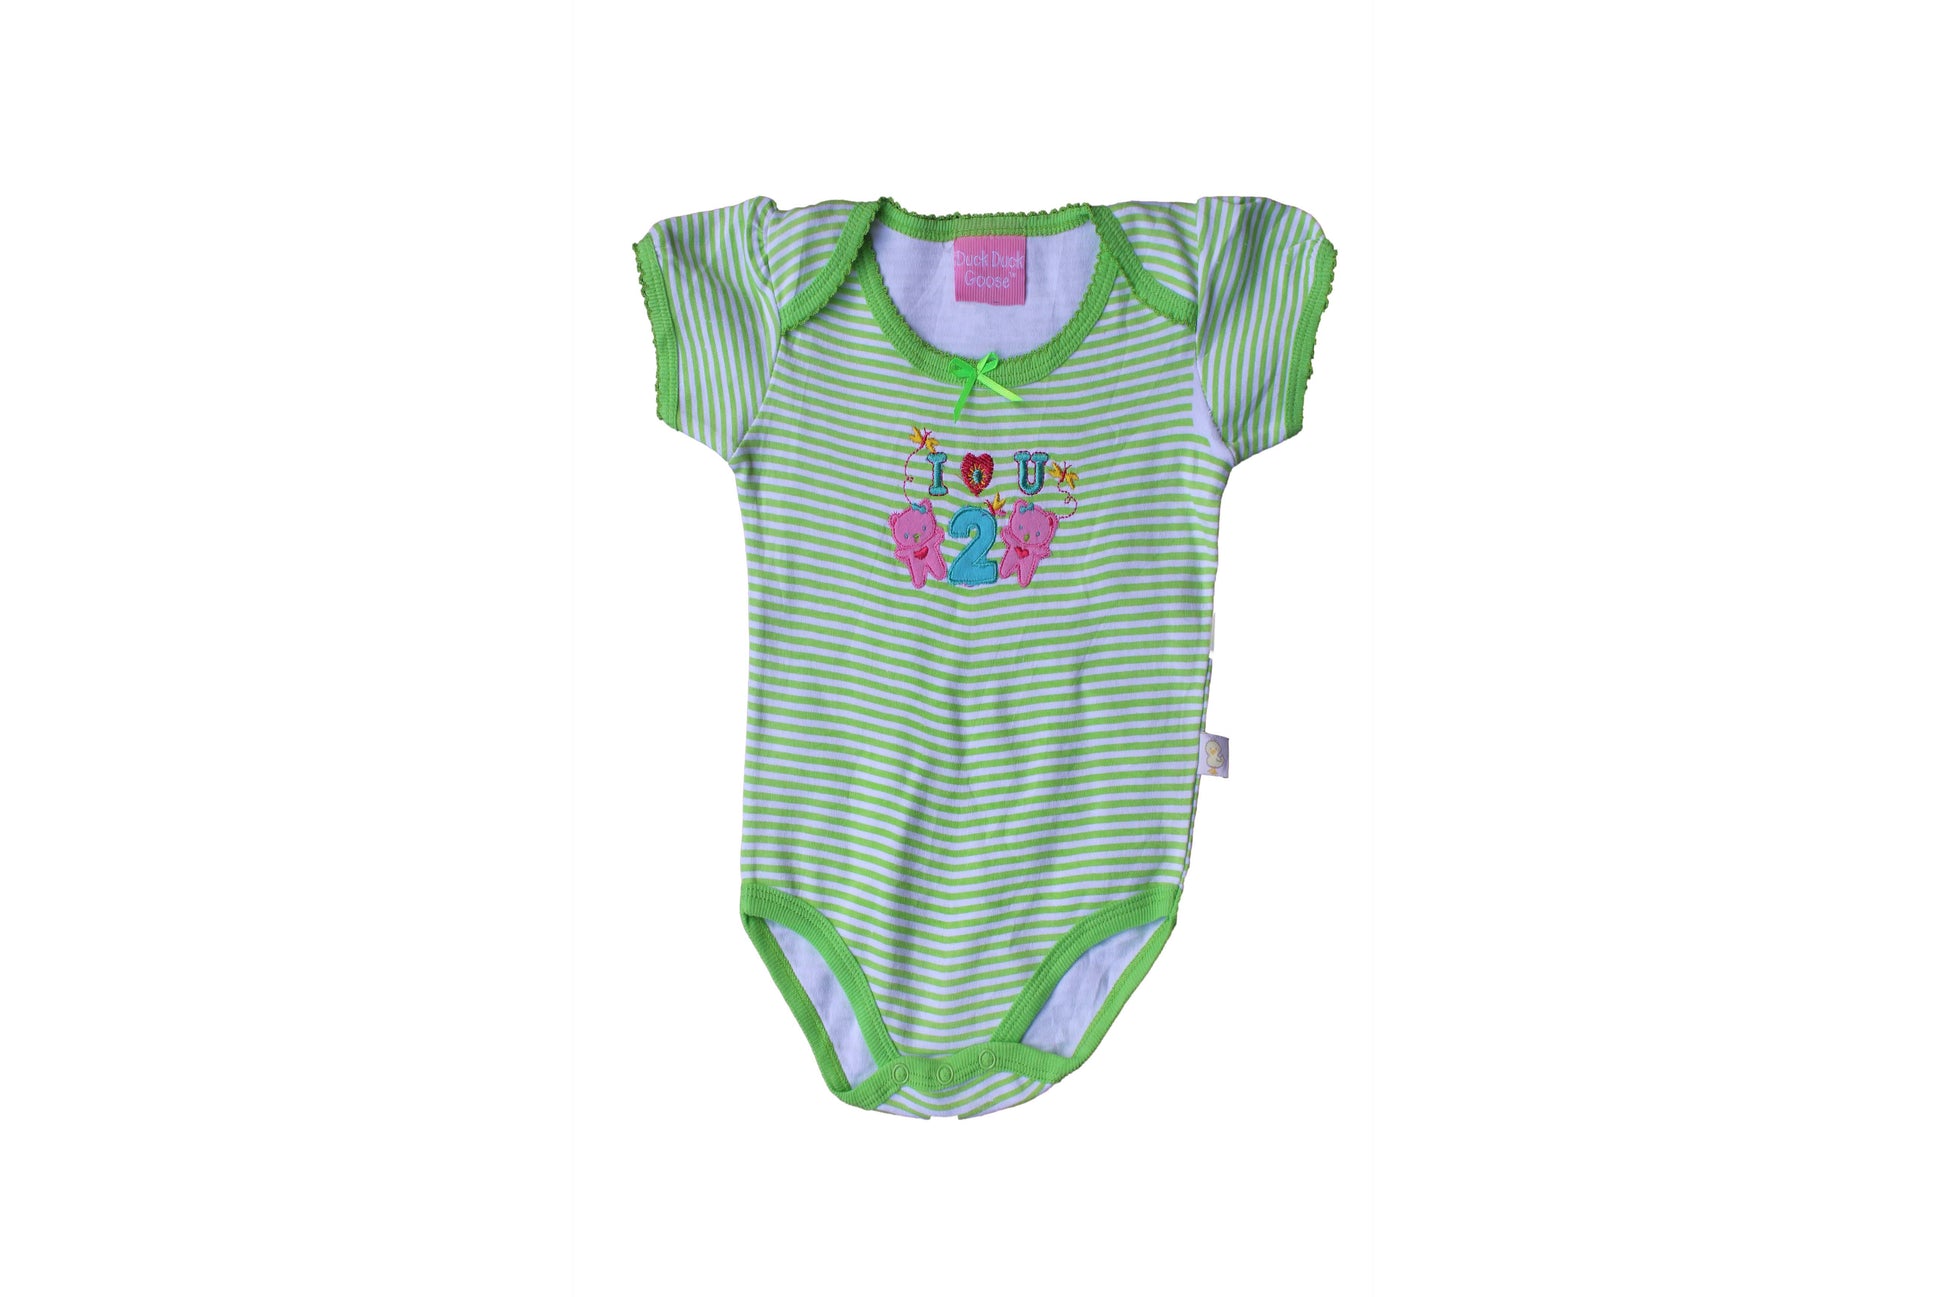 Green & White Striped ‘I Love You’ Baby Grow - BuyAbility South Africa